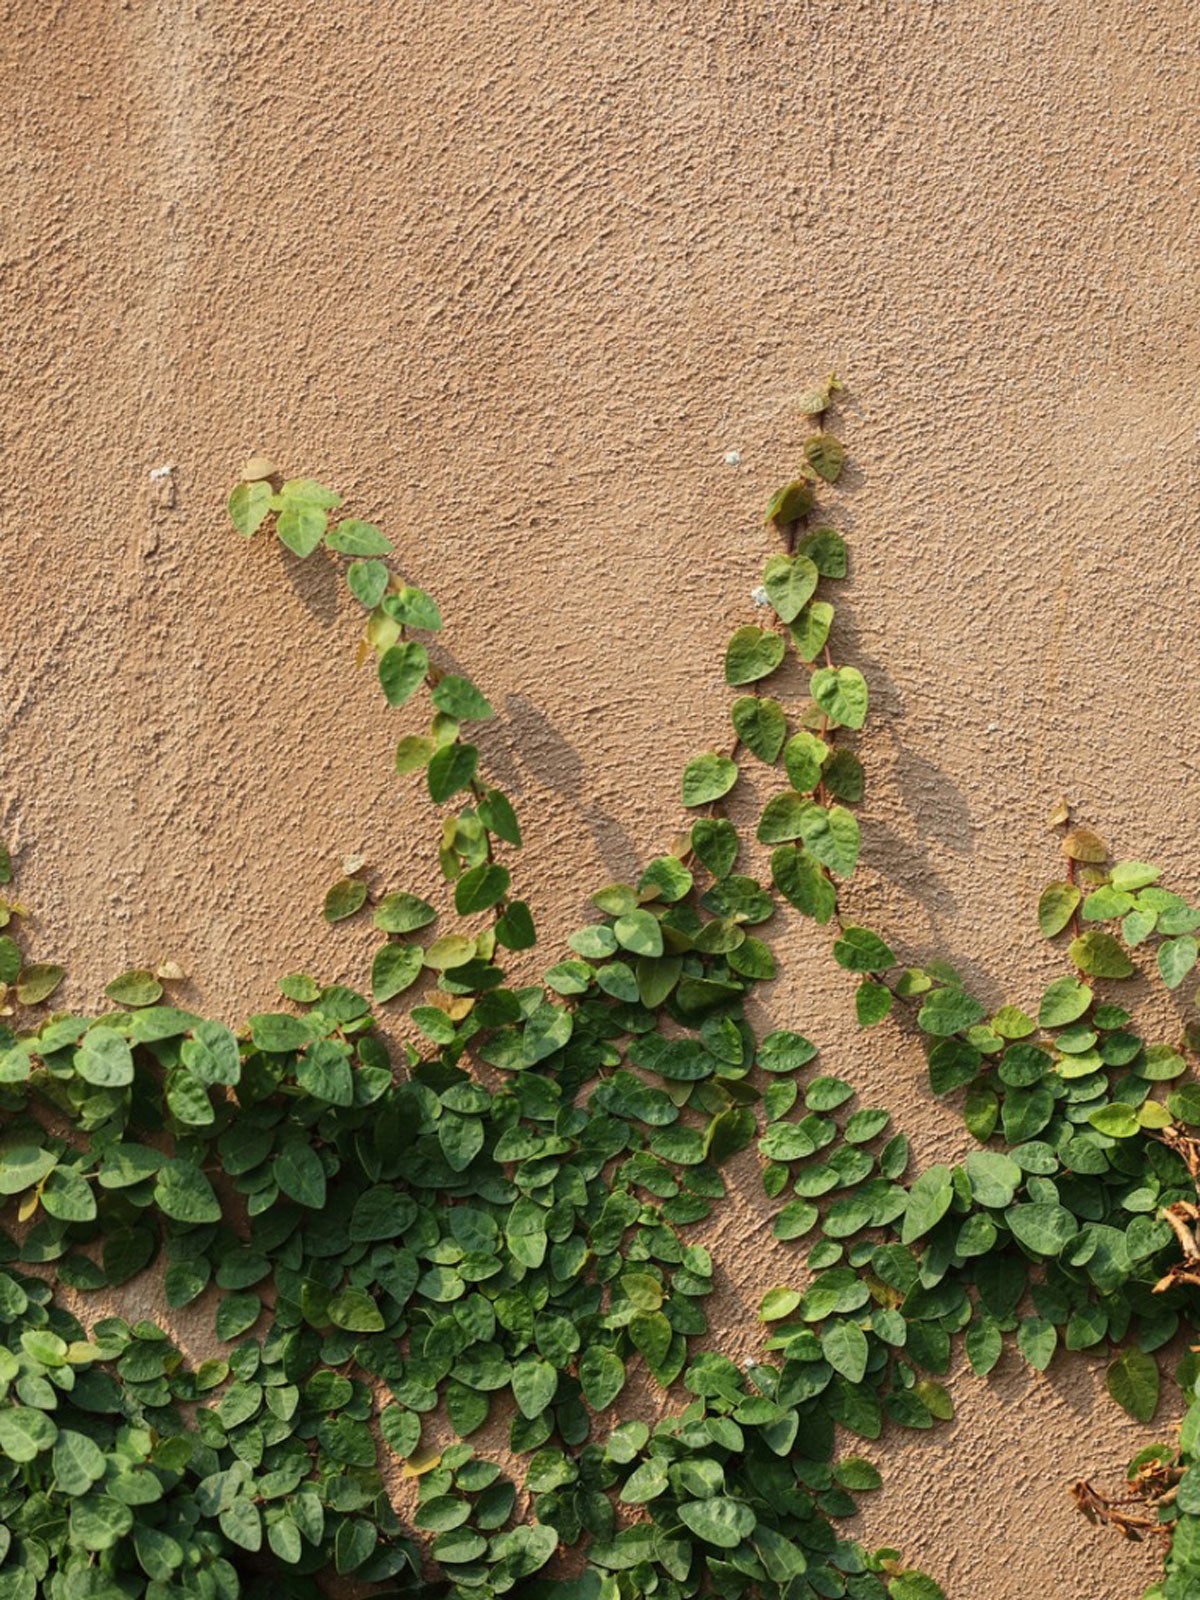 creeping fig growing on walls: attaching creeping fig to a wall